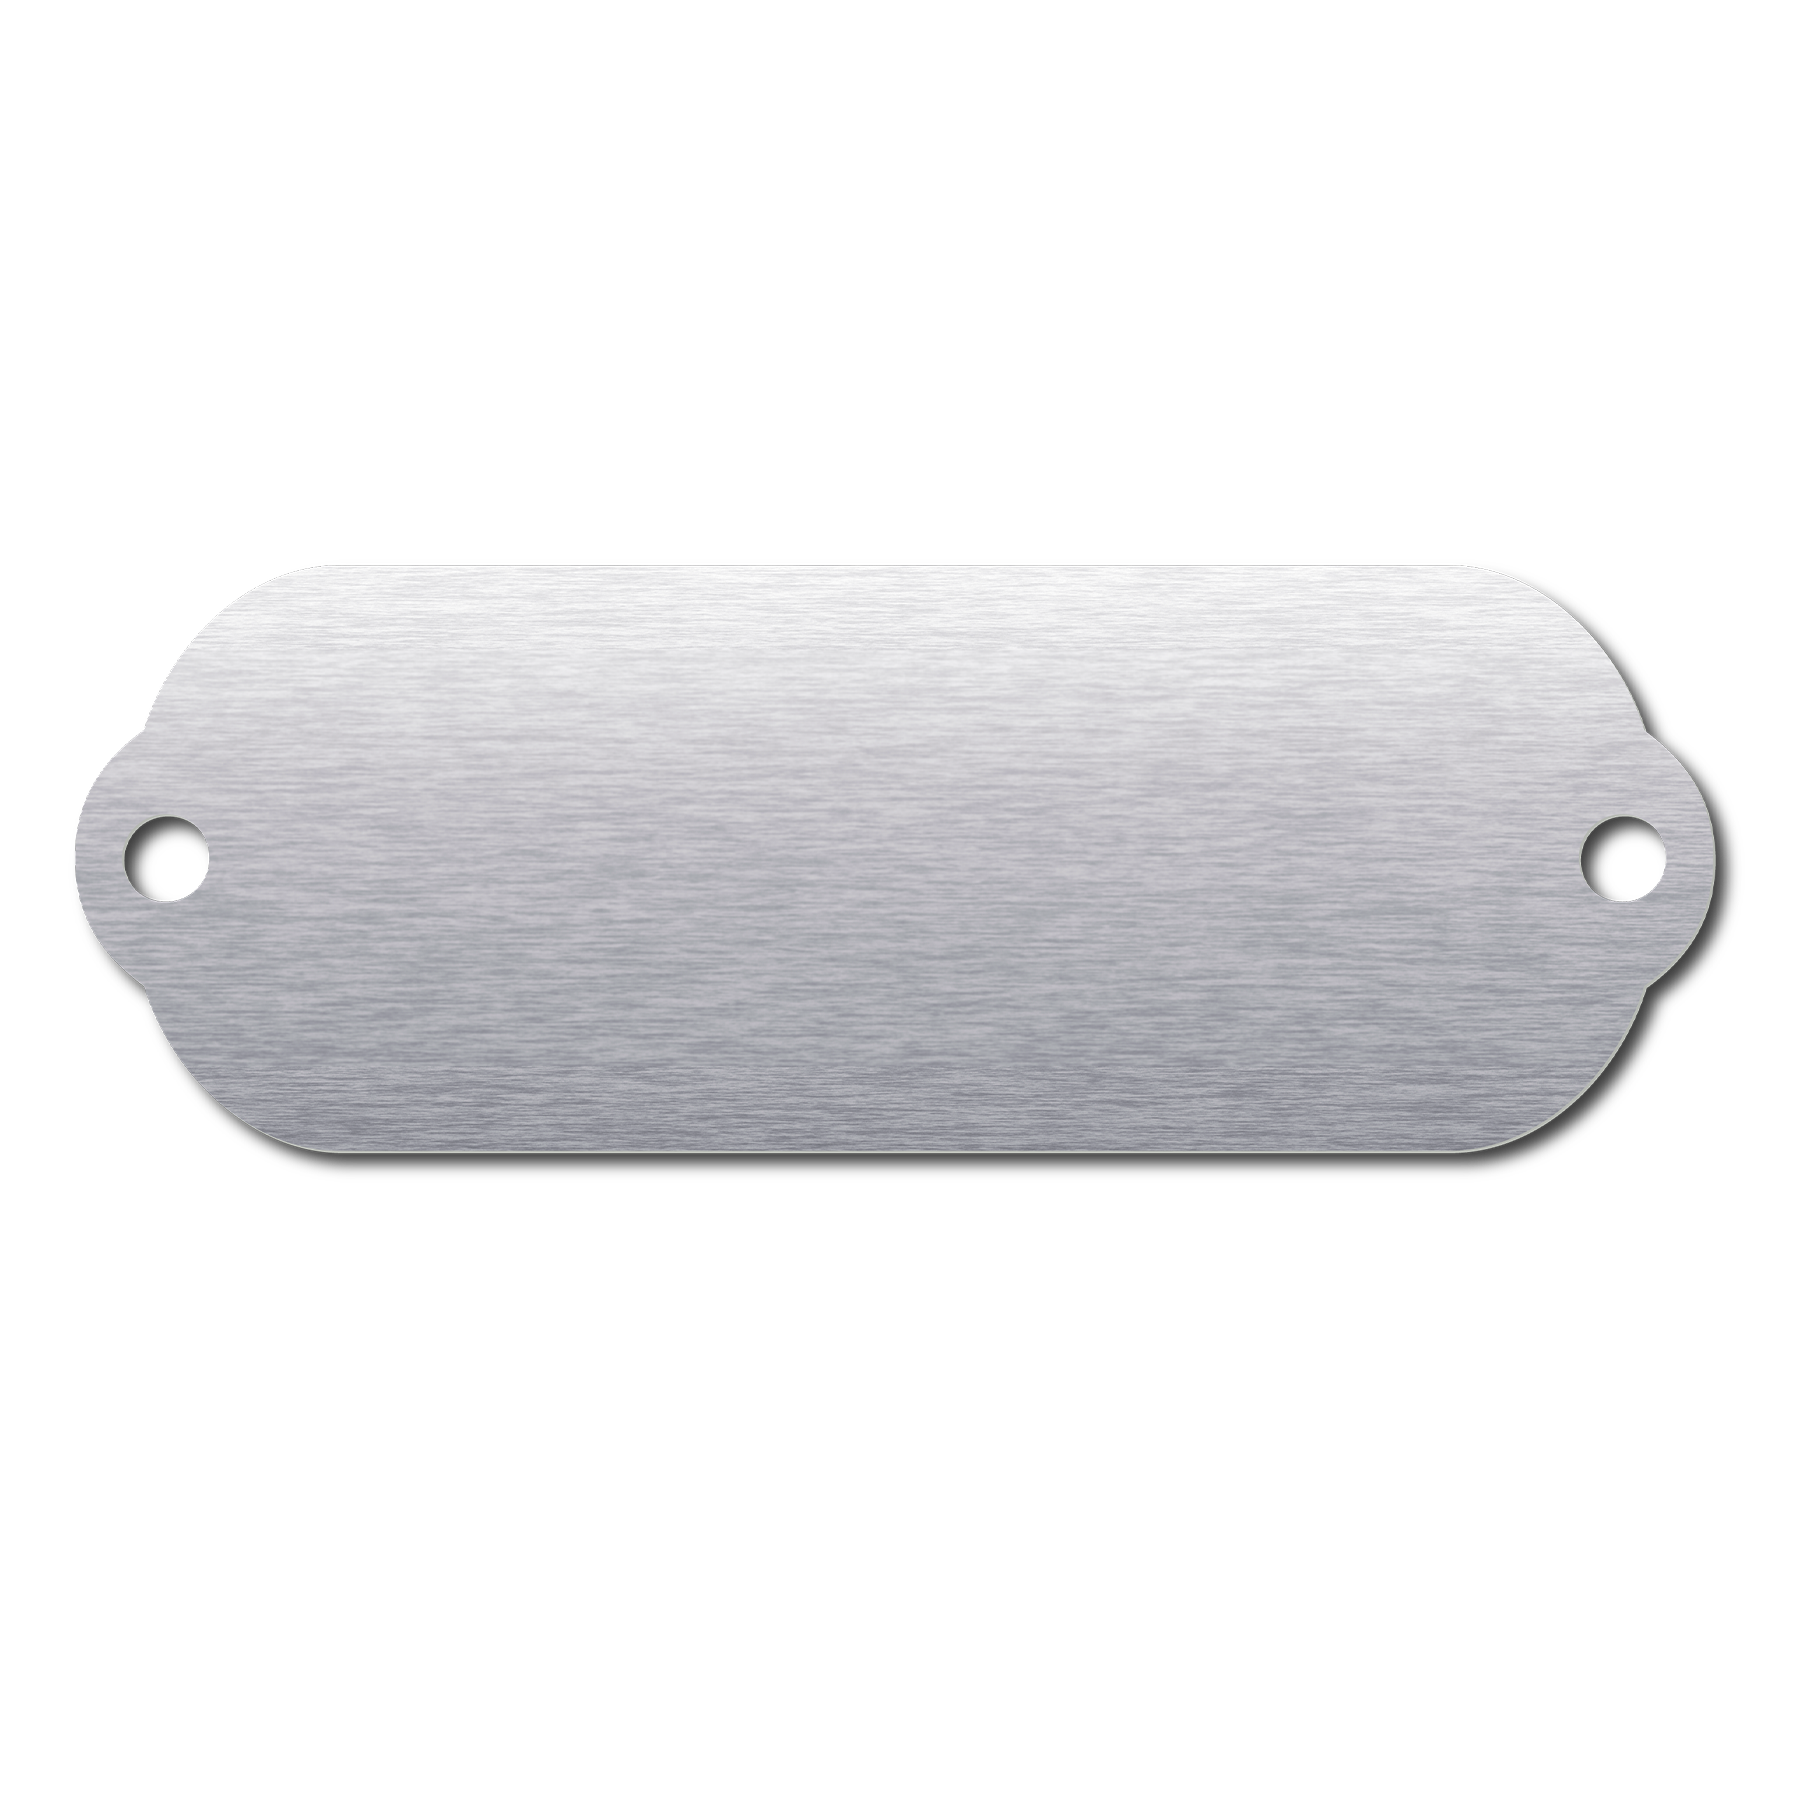 Anodized Aluminum Rectangle Rivet-On Tags, 5/8" x 1-3/4" with 3/32" Holes, Laser Engraved - Craftworks NW, LLC